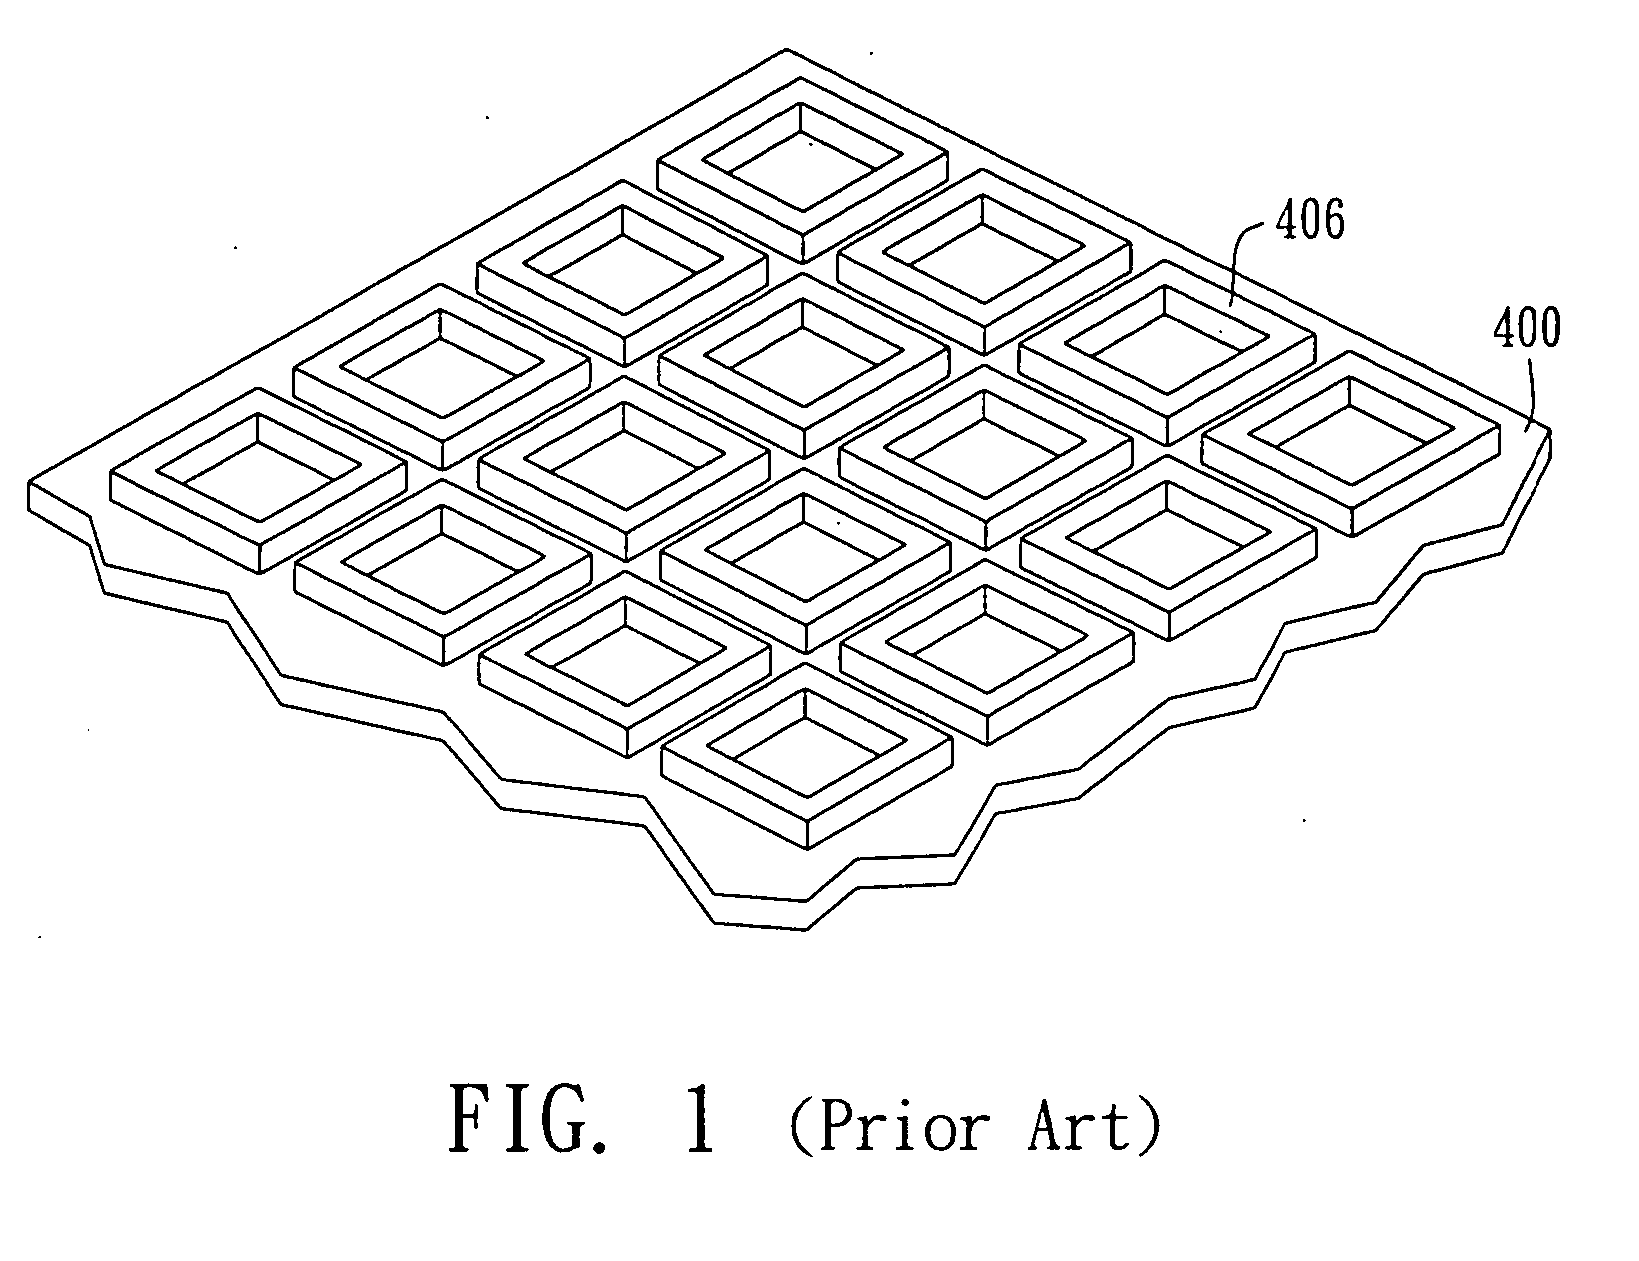 Optoelectronic device chip having a composite spacer structure and method making same